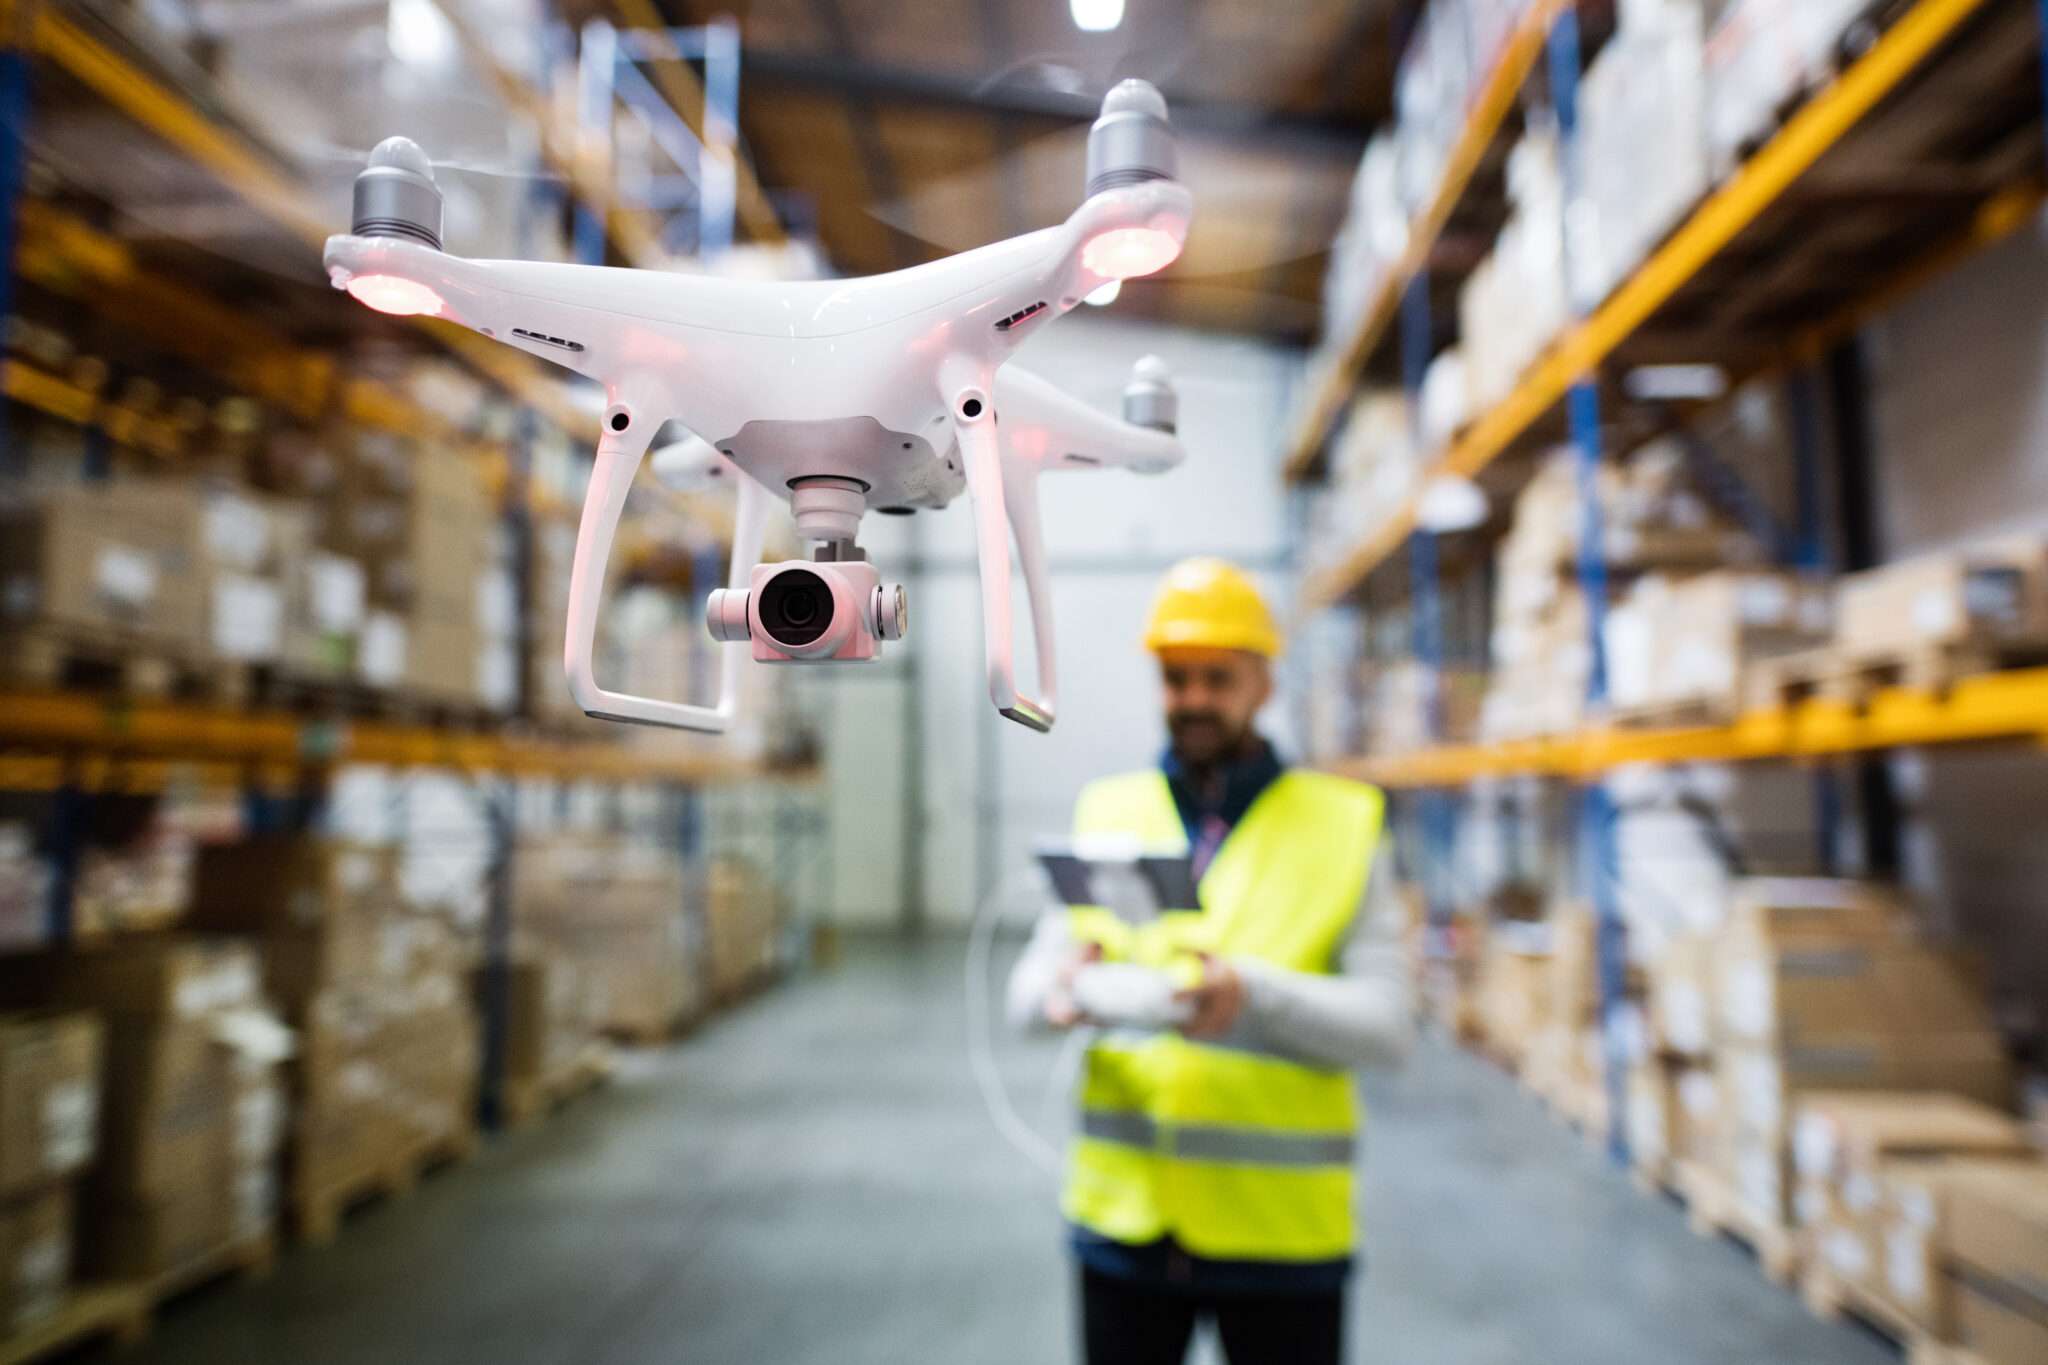 The warehouse worker is using the autonomous drone for inventory management task.